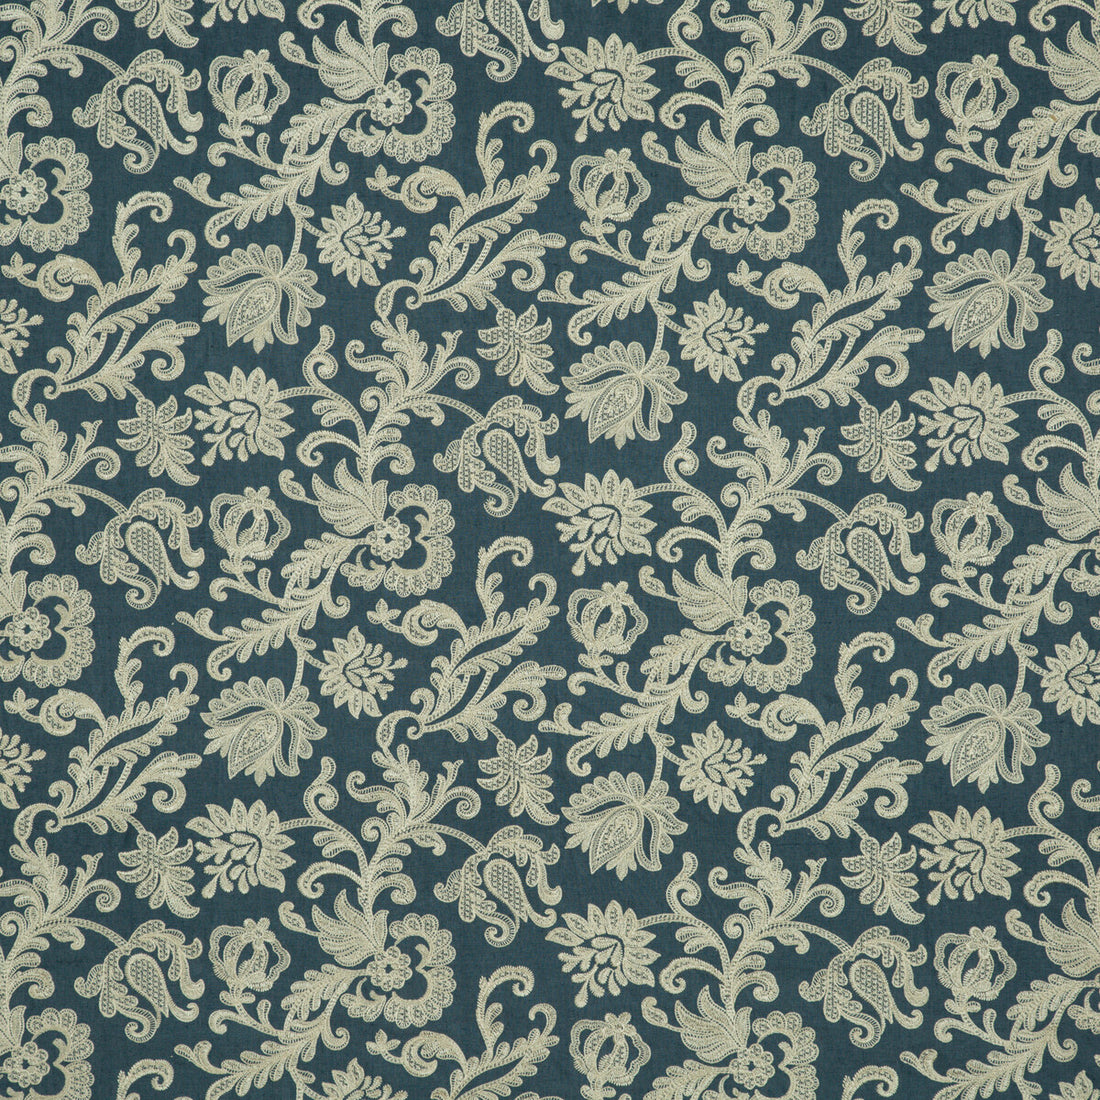 Derwent fabric in indigo color - pattern BF10535.680.0 - by G P &amp; J Baker in the Langdale collection